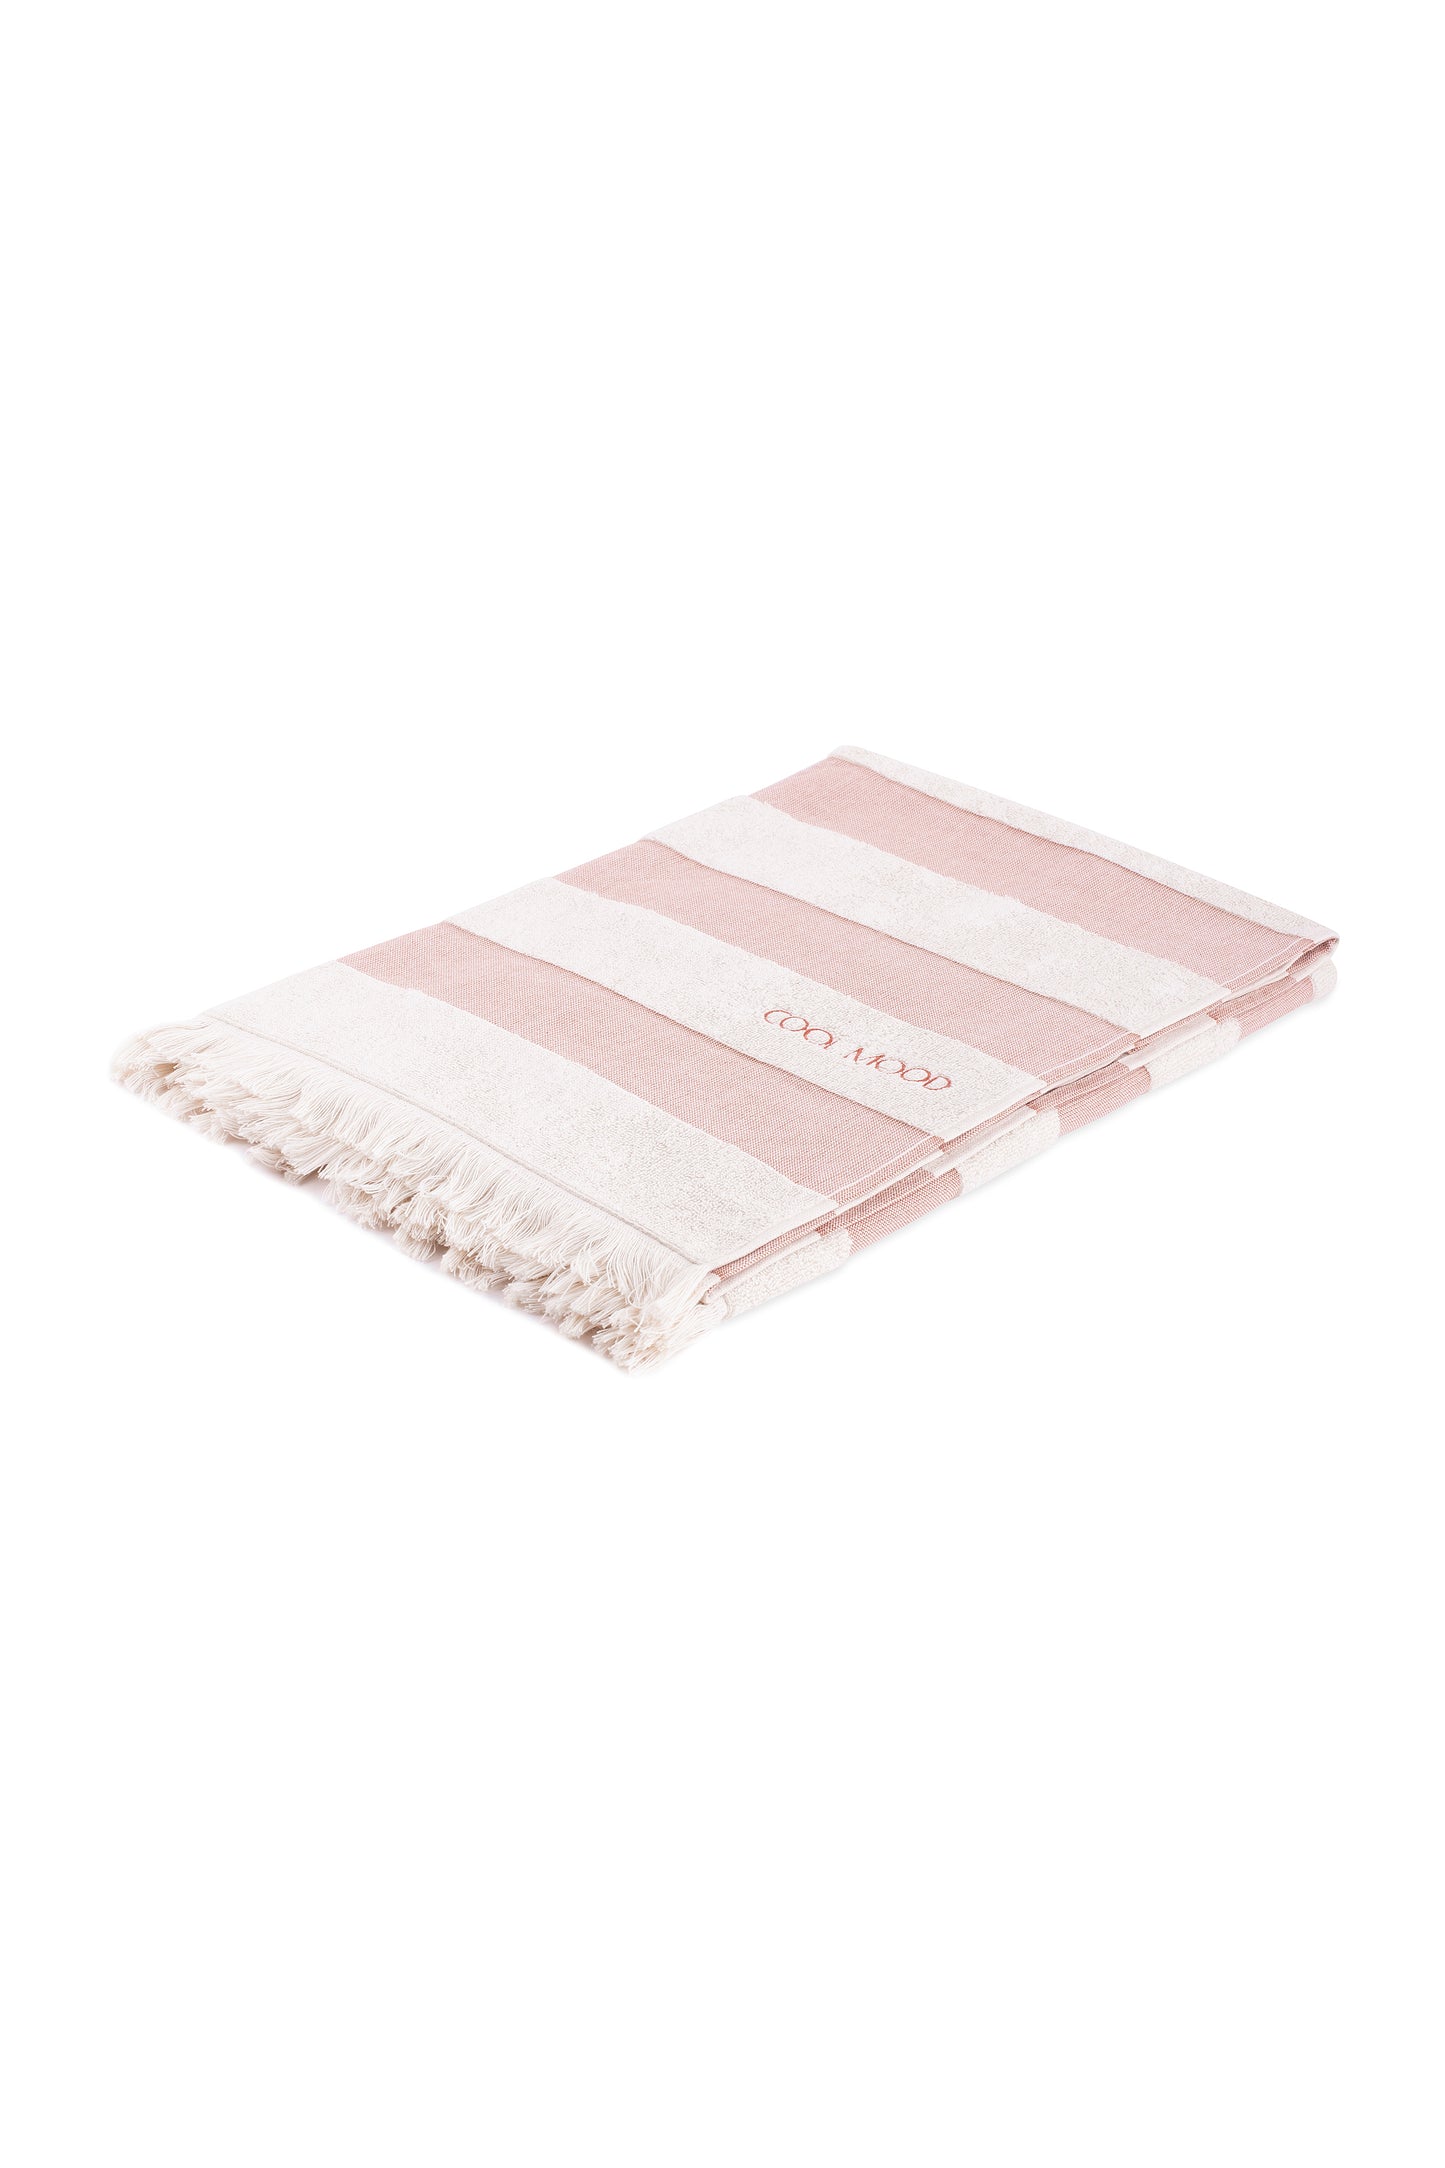 Beach towel in rust shade, with soft terry stripes, eyelash fringing detail and embroidery in rust